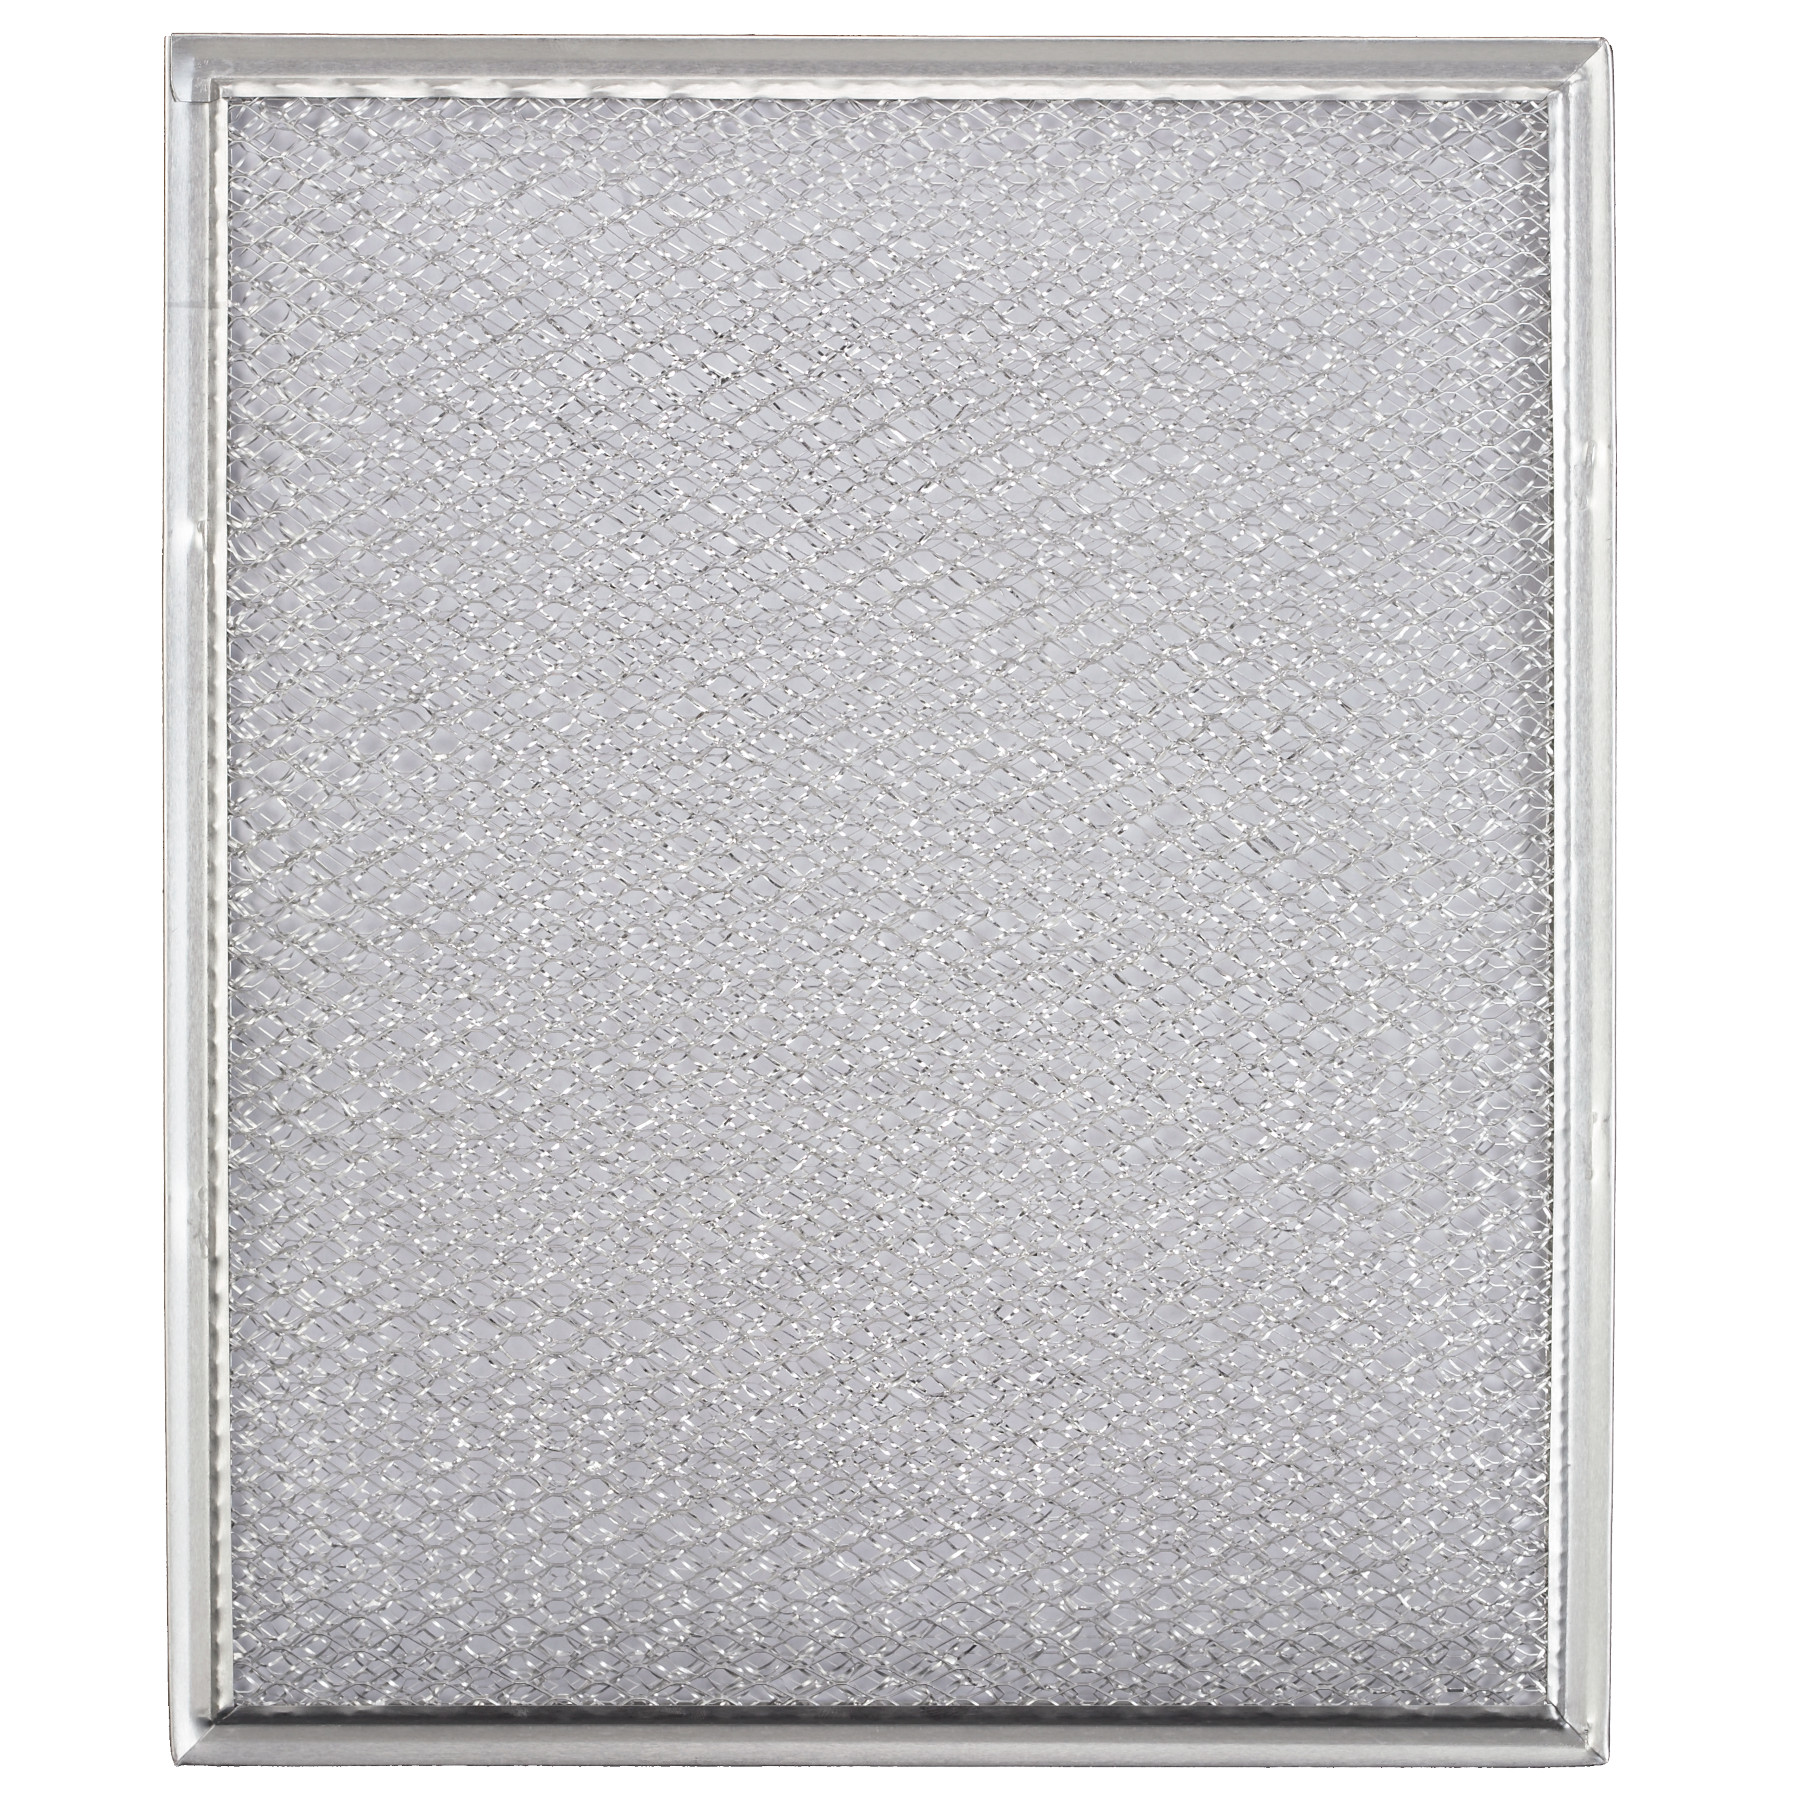 Broan-NuTone® Genuine Replacement Aluminum Filter for Range Hoods, 10-1/2" x 8-3/4", Fits Select Models